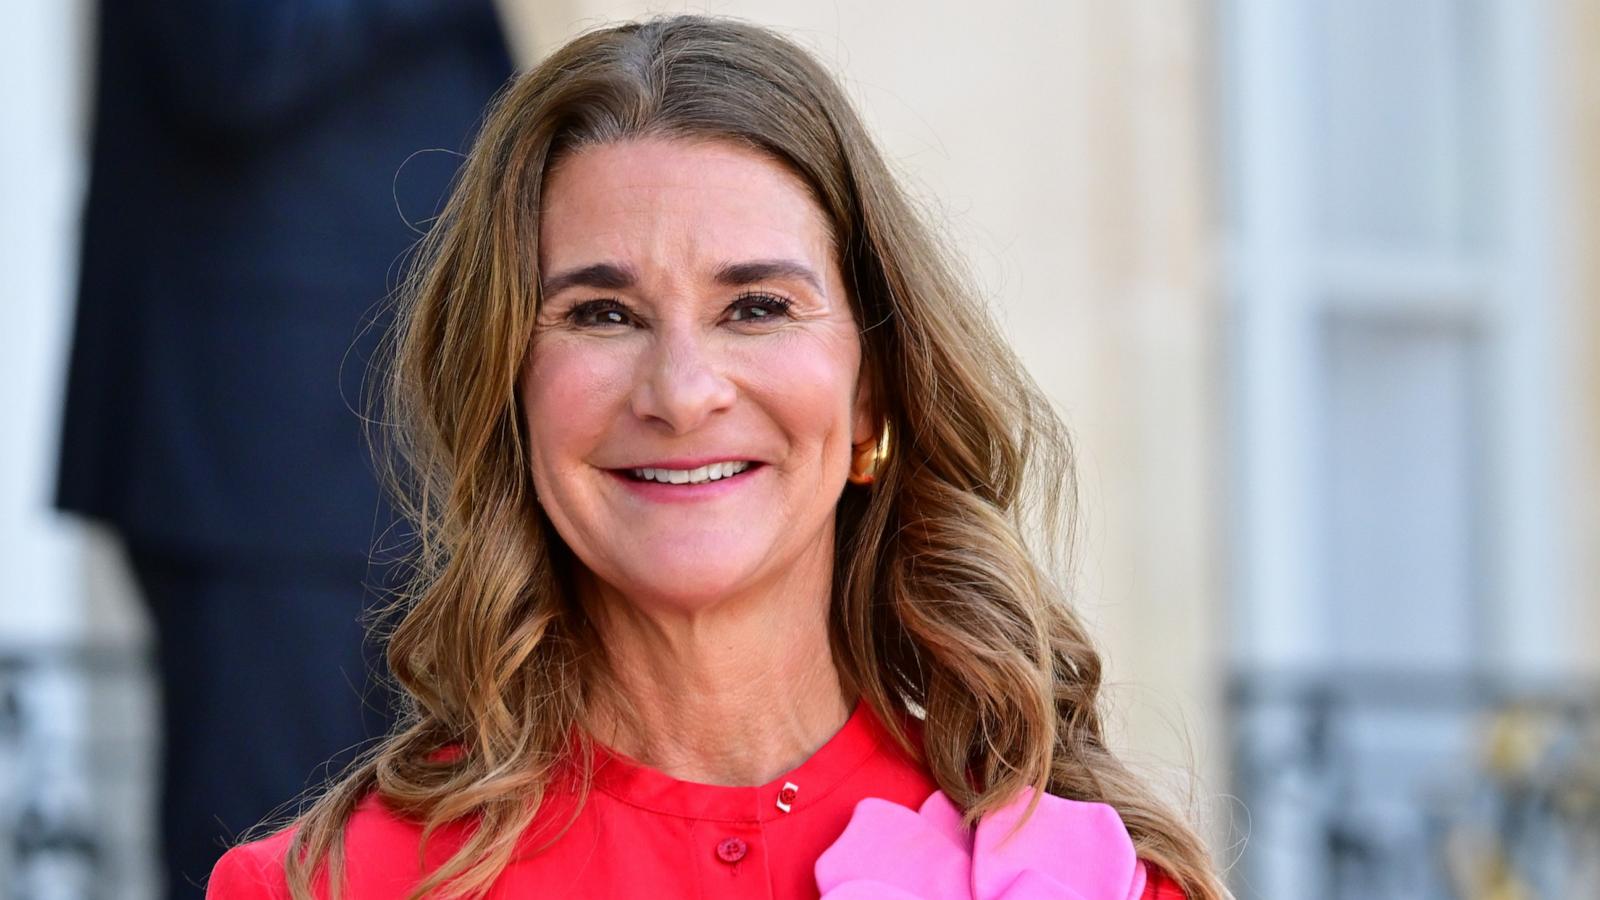 PHOTO: US philanthropist Melinda French Gates arrives for a meeting at the Elysee Palace, amid the New Global Financial Pact Summit in Paris June 23, 2023 in Paris, France.